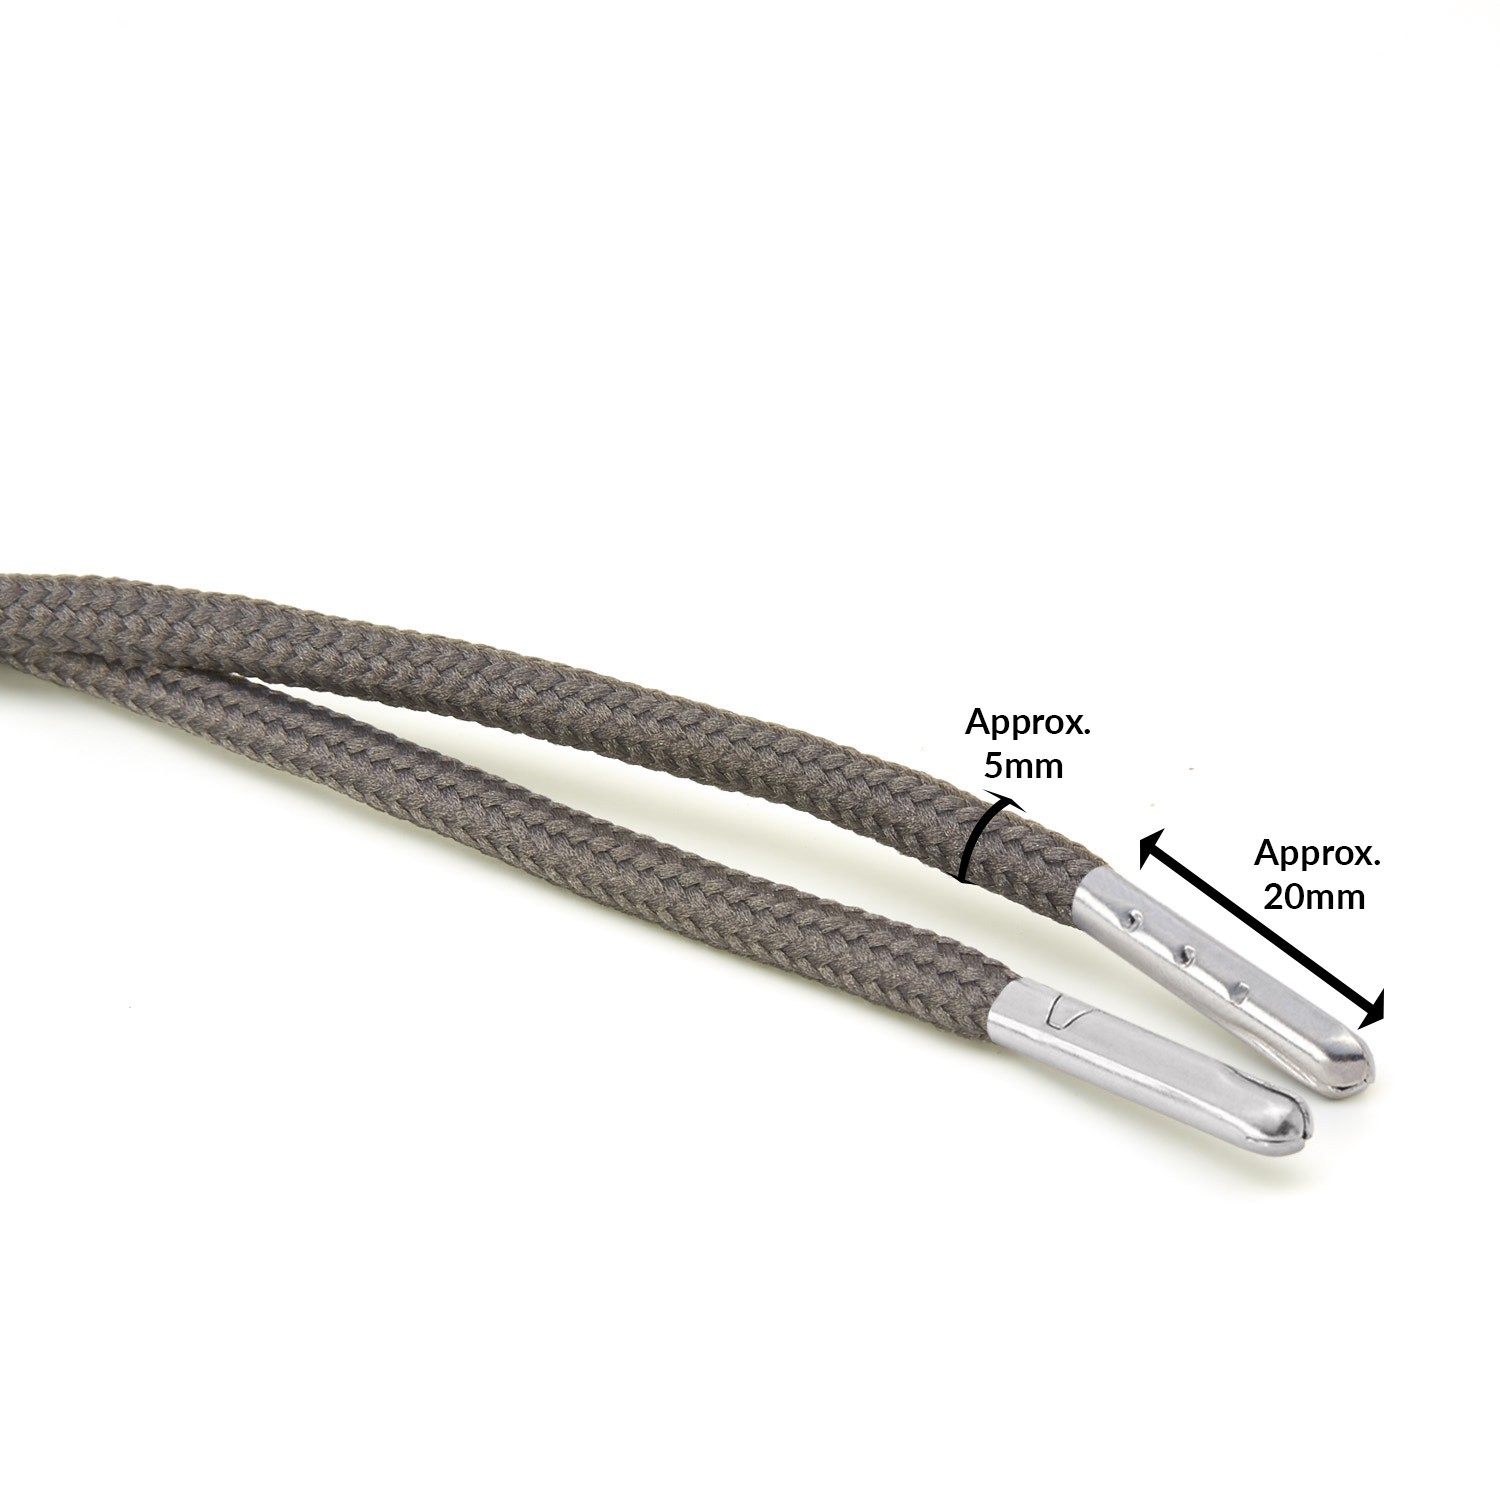 T621 5mm Round Polyester Shoe Laces Grey Edit 3 Silver Metal Tip Kalsi Cords